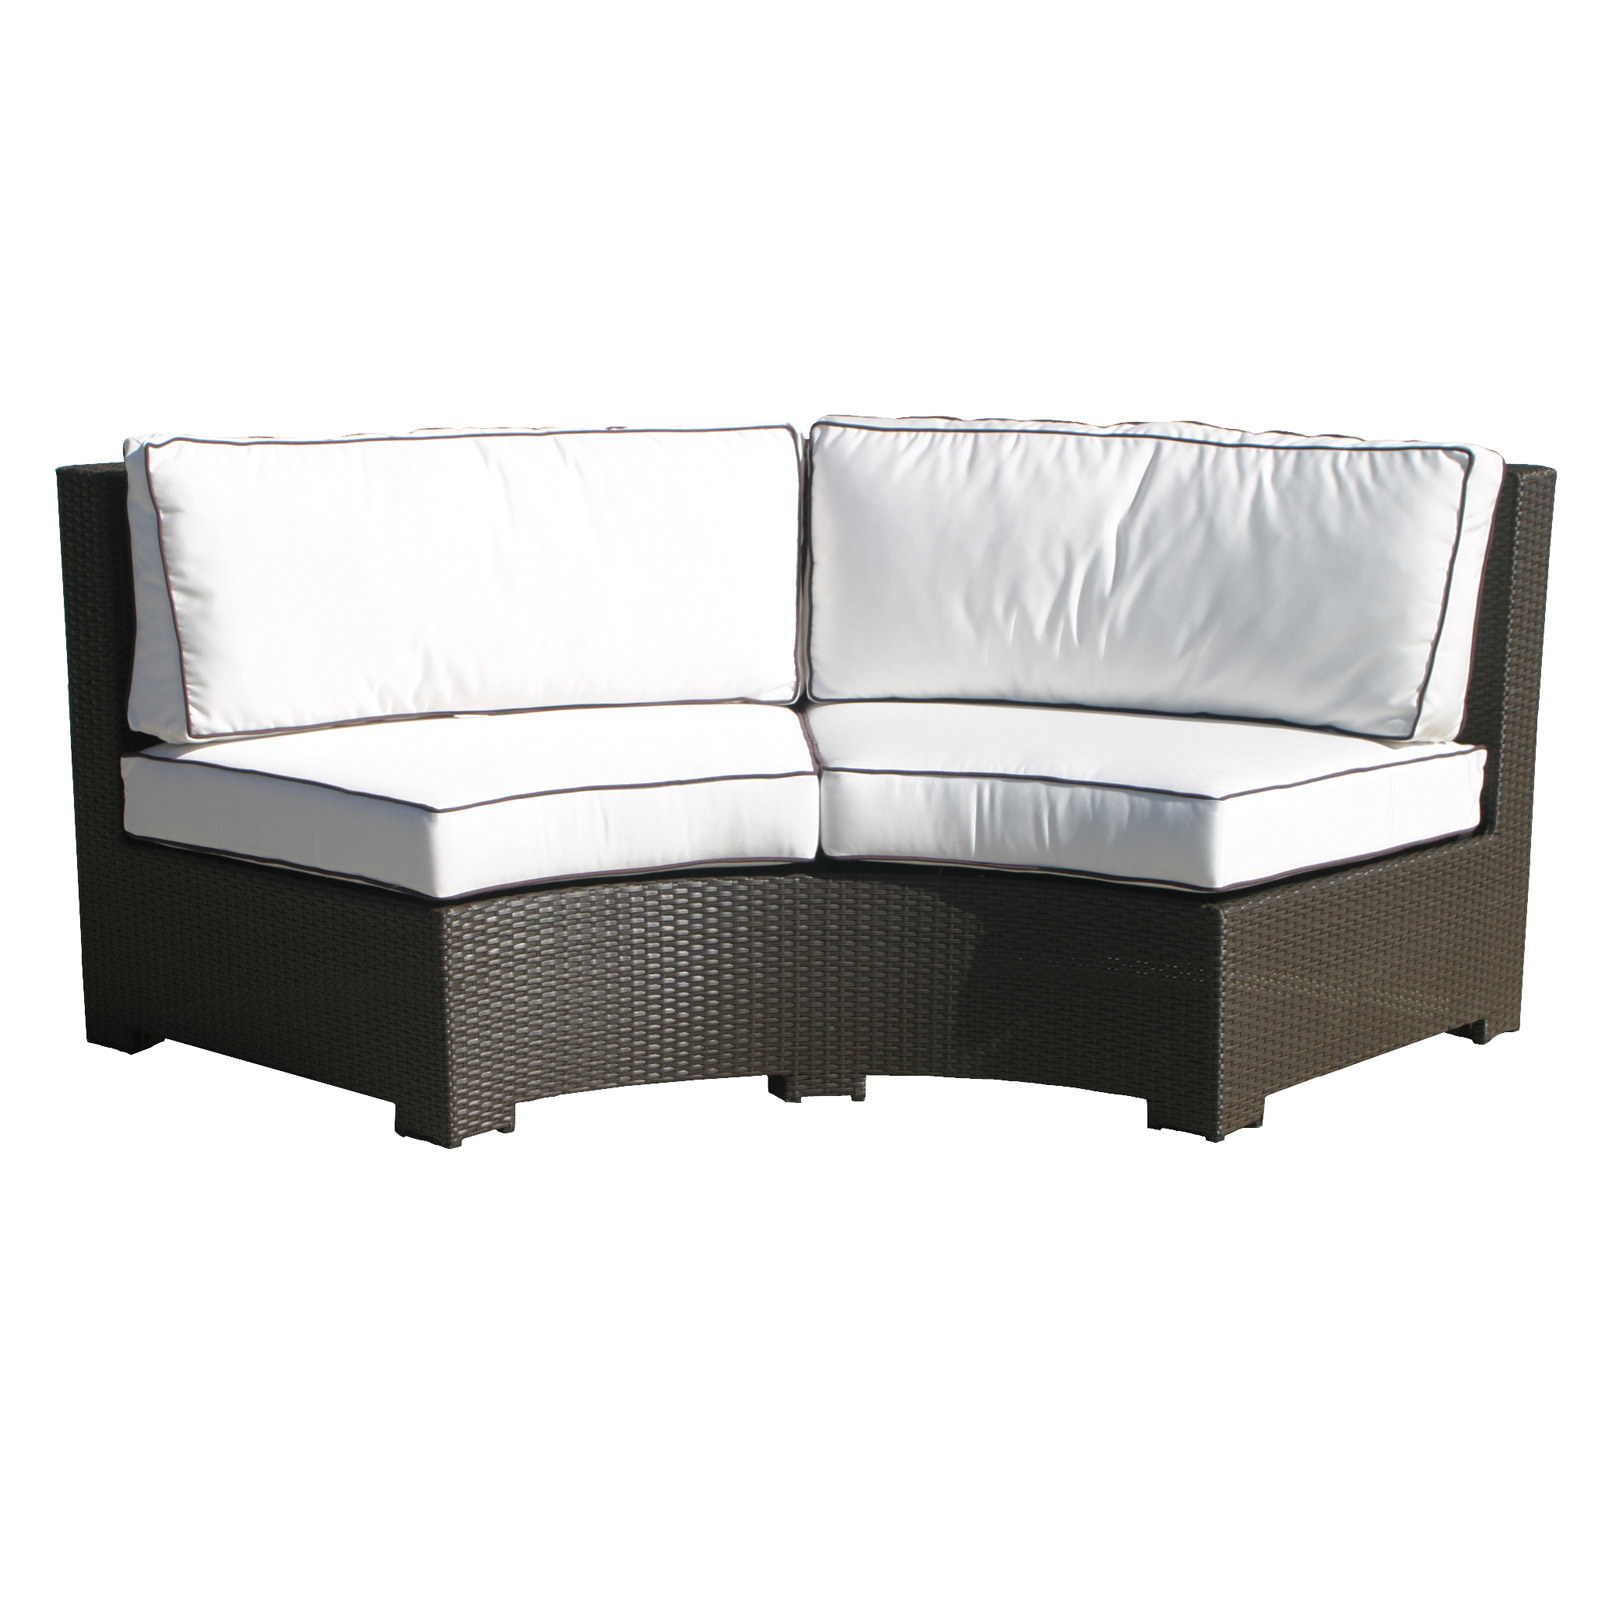 Curved Sofa Patio Furniture Office Furniture Memphis intended for sizing 1600 X 1600